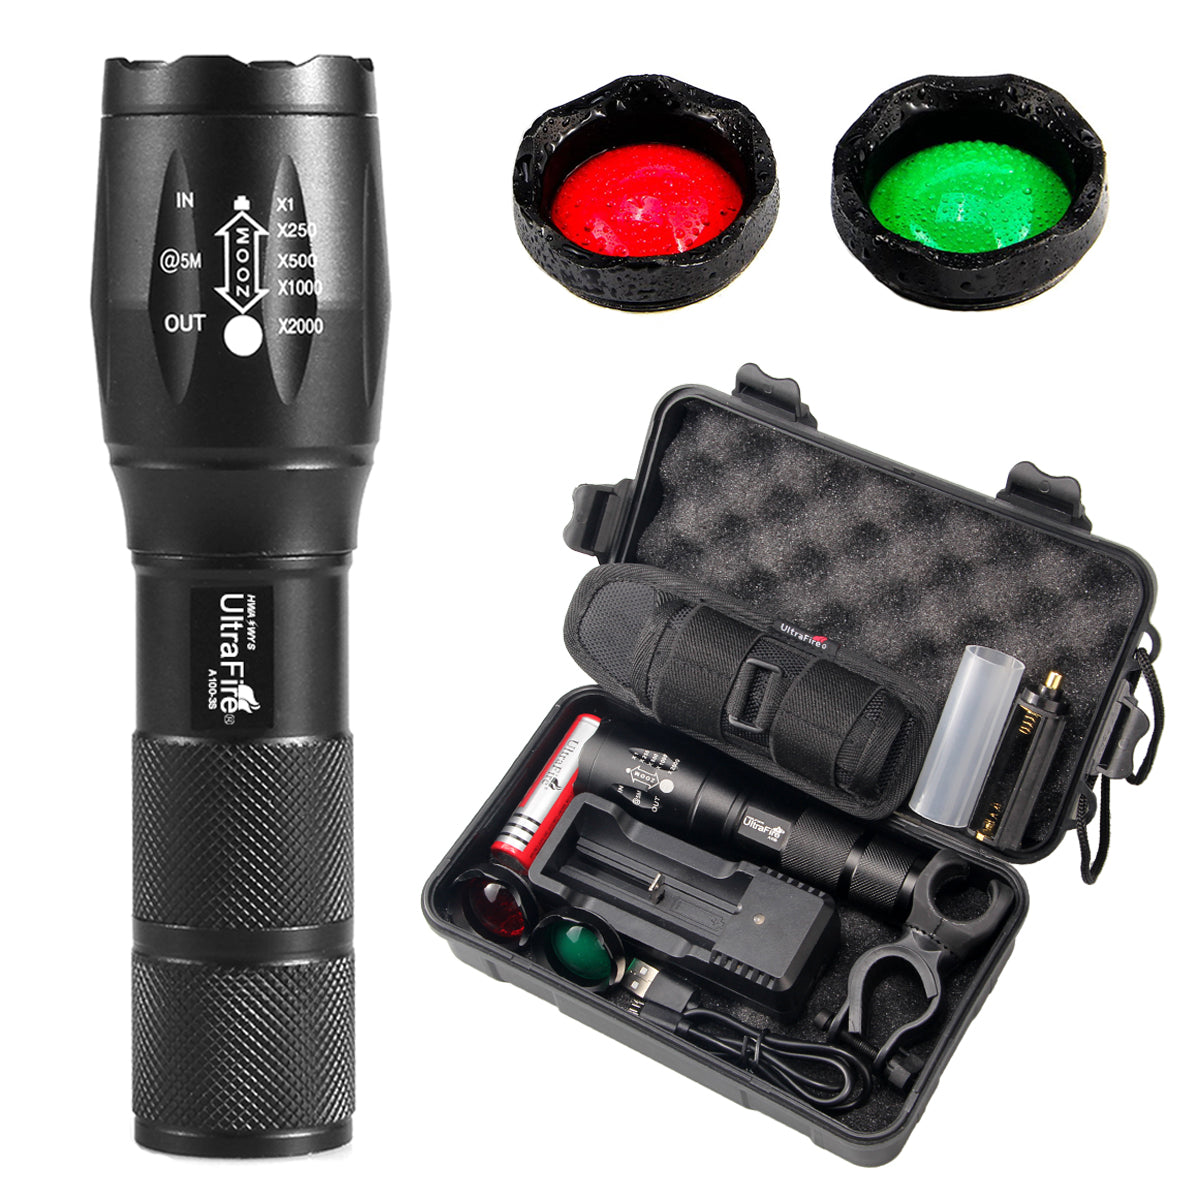 UltraFire A100 Tactical LED Flashlight with 3 colors Exchange Glass Lens (Generate RED or GREEN light )